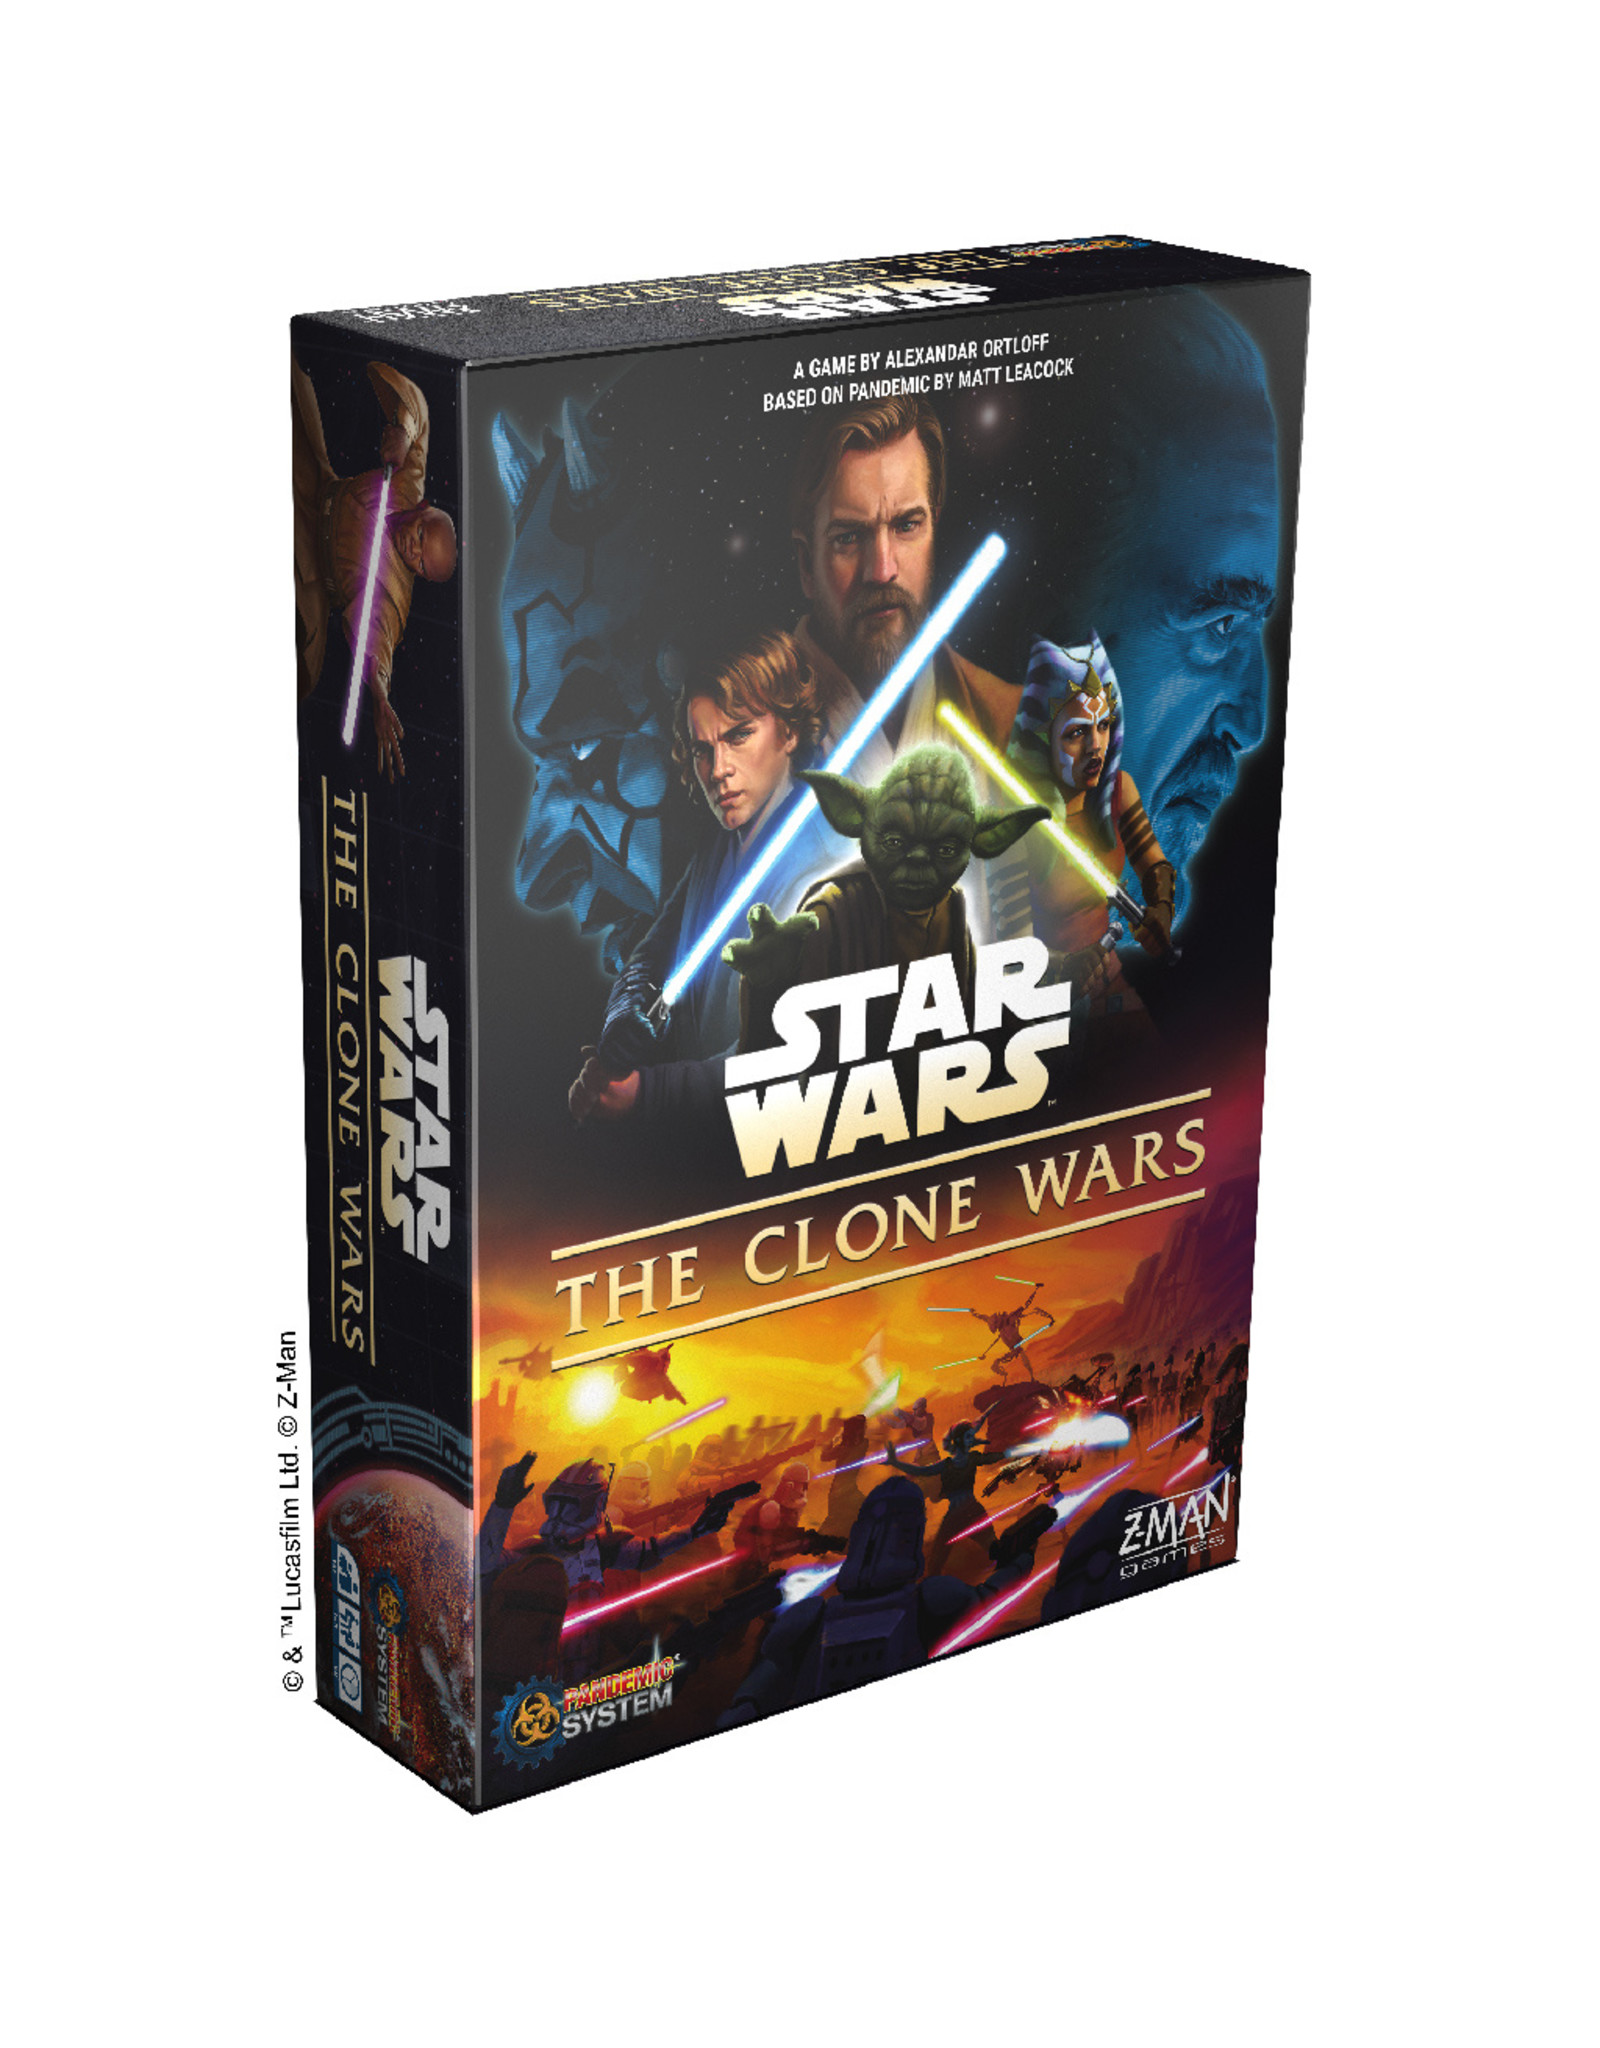 Star Wars - The Clone Wars (A Pandemic System Game)